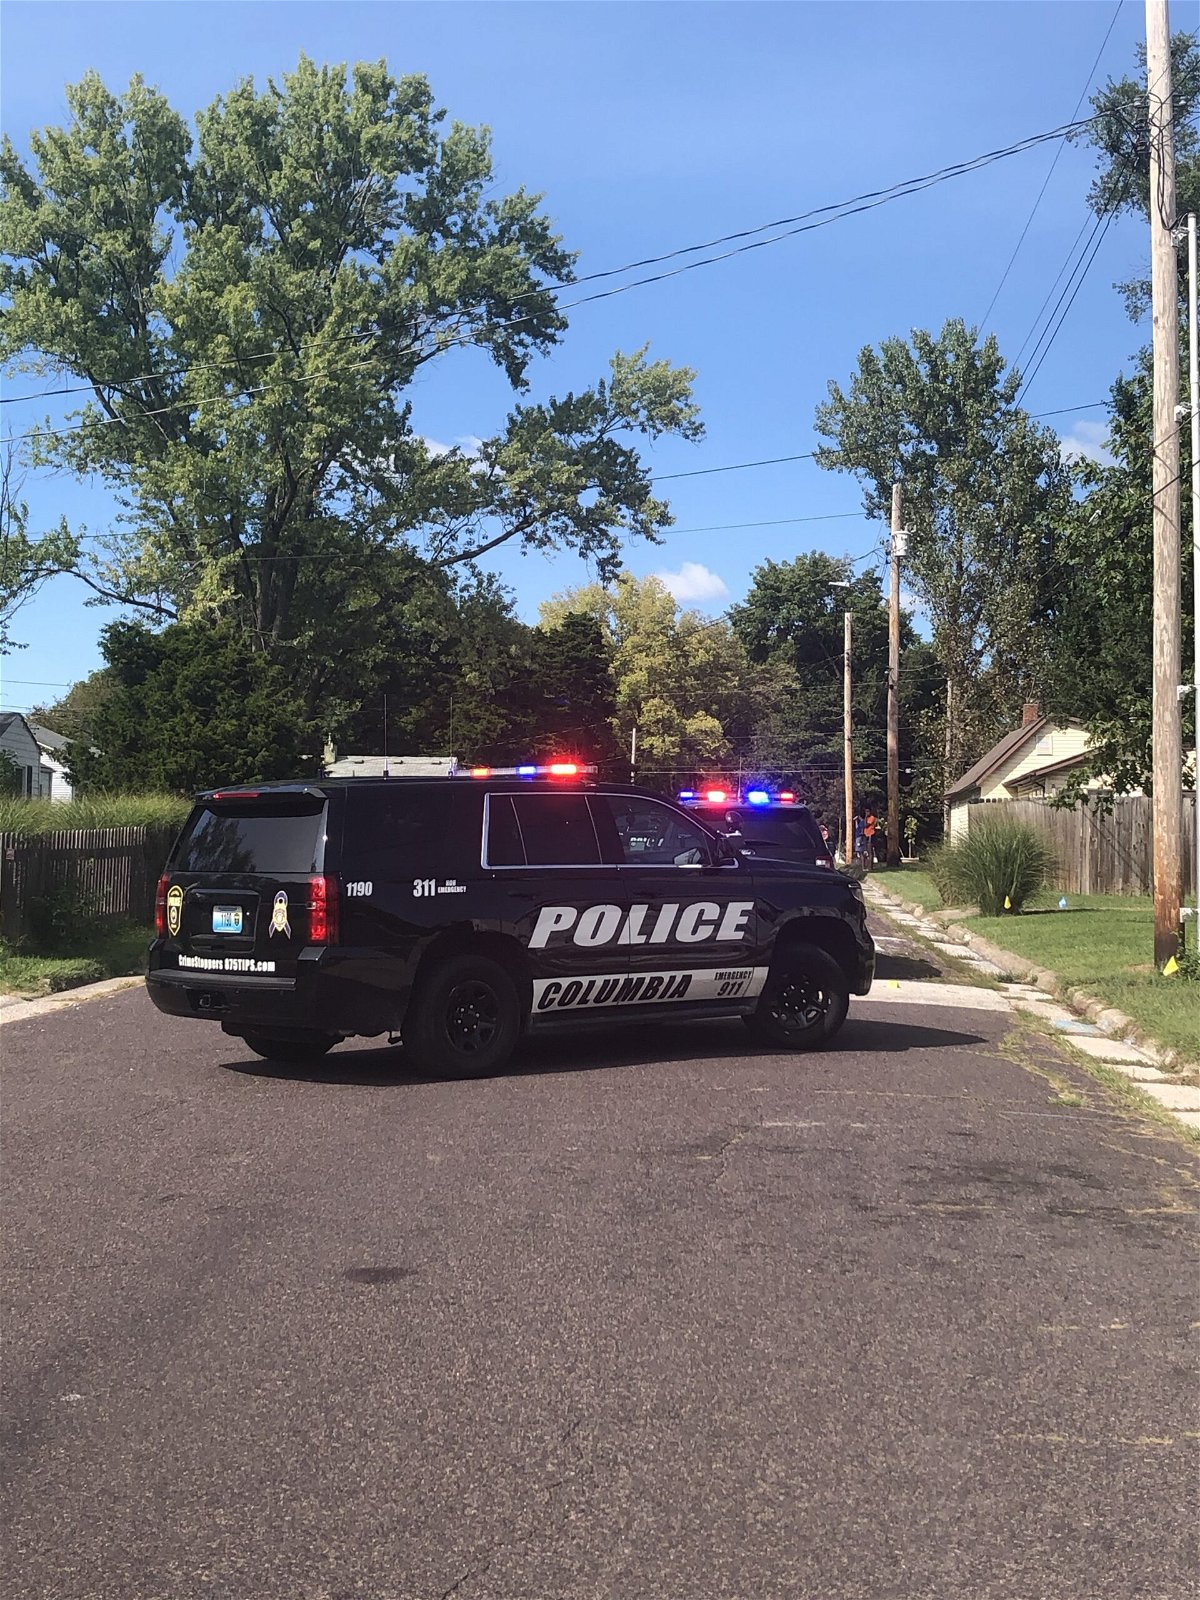 Columbia police investigate a report of shorts fired on Hirth Avenue on Sunday, Sept. 14, 2020.